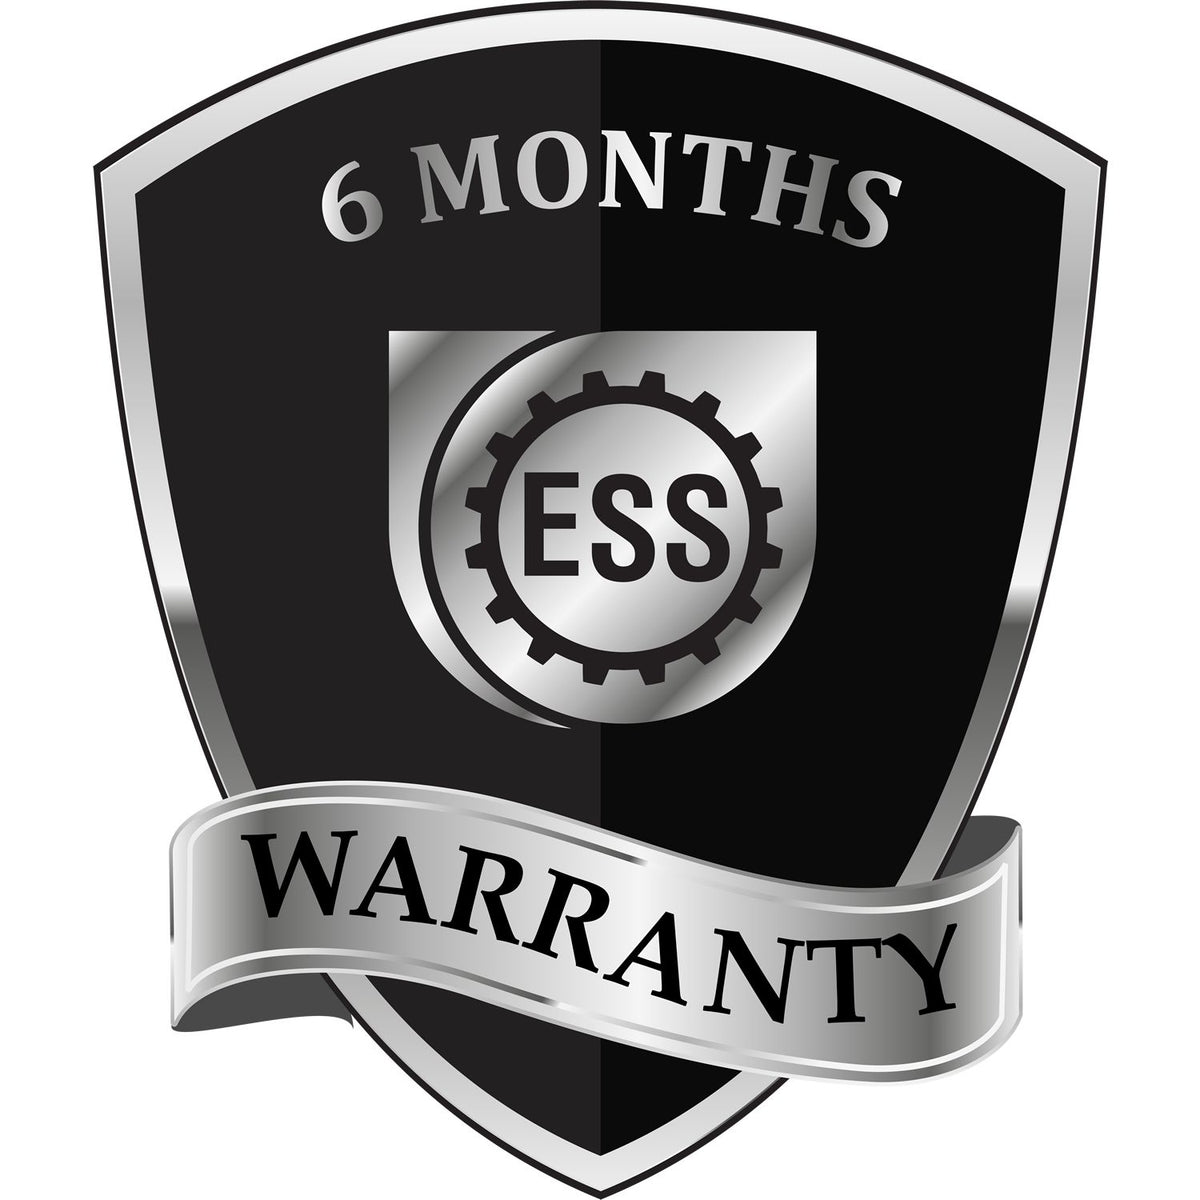 A black and silver badge or emblem showing warranty information for the Self-Inking Utah Geologist Stamp